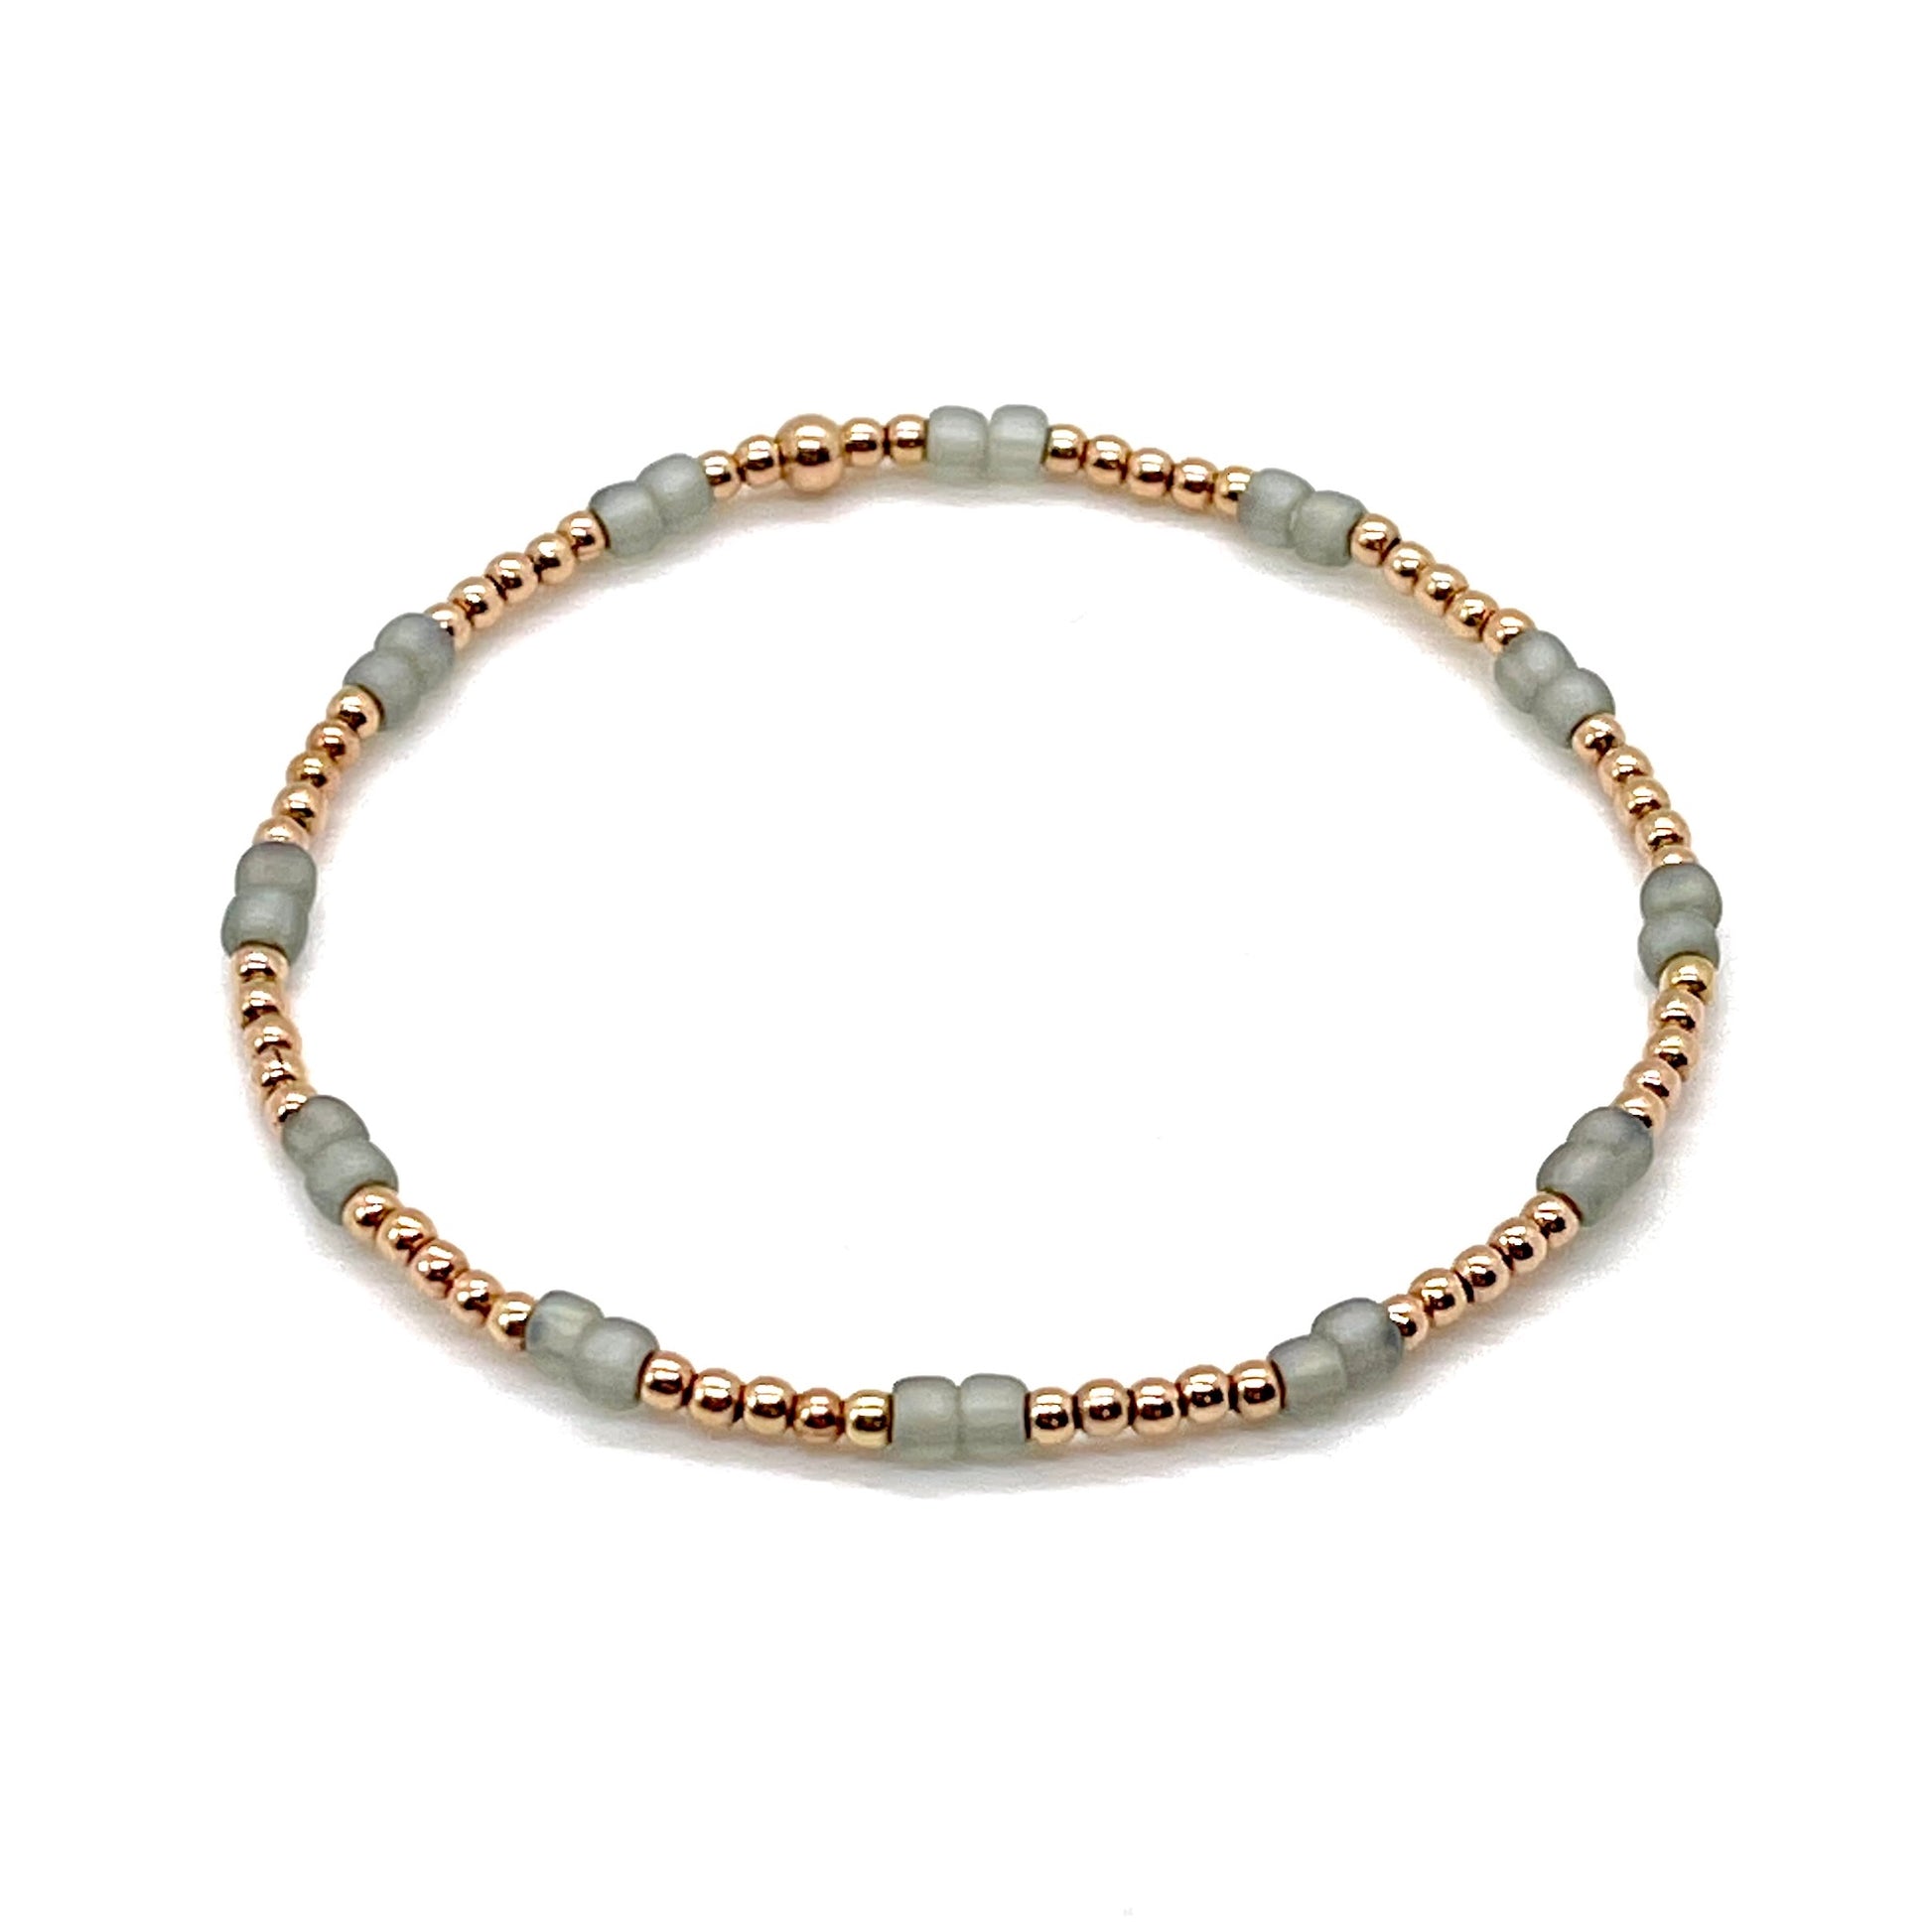 Rose gold 2mm bead stretch bracelet with frosted mint green seed beads.